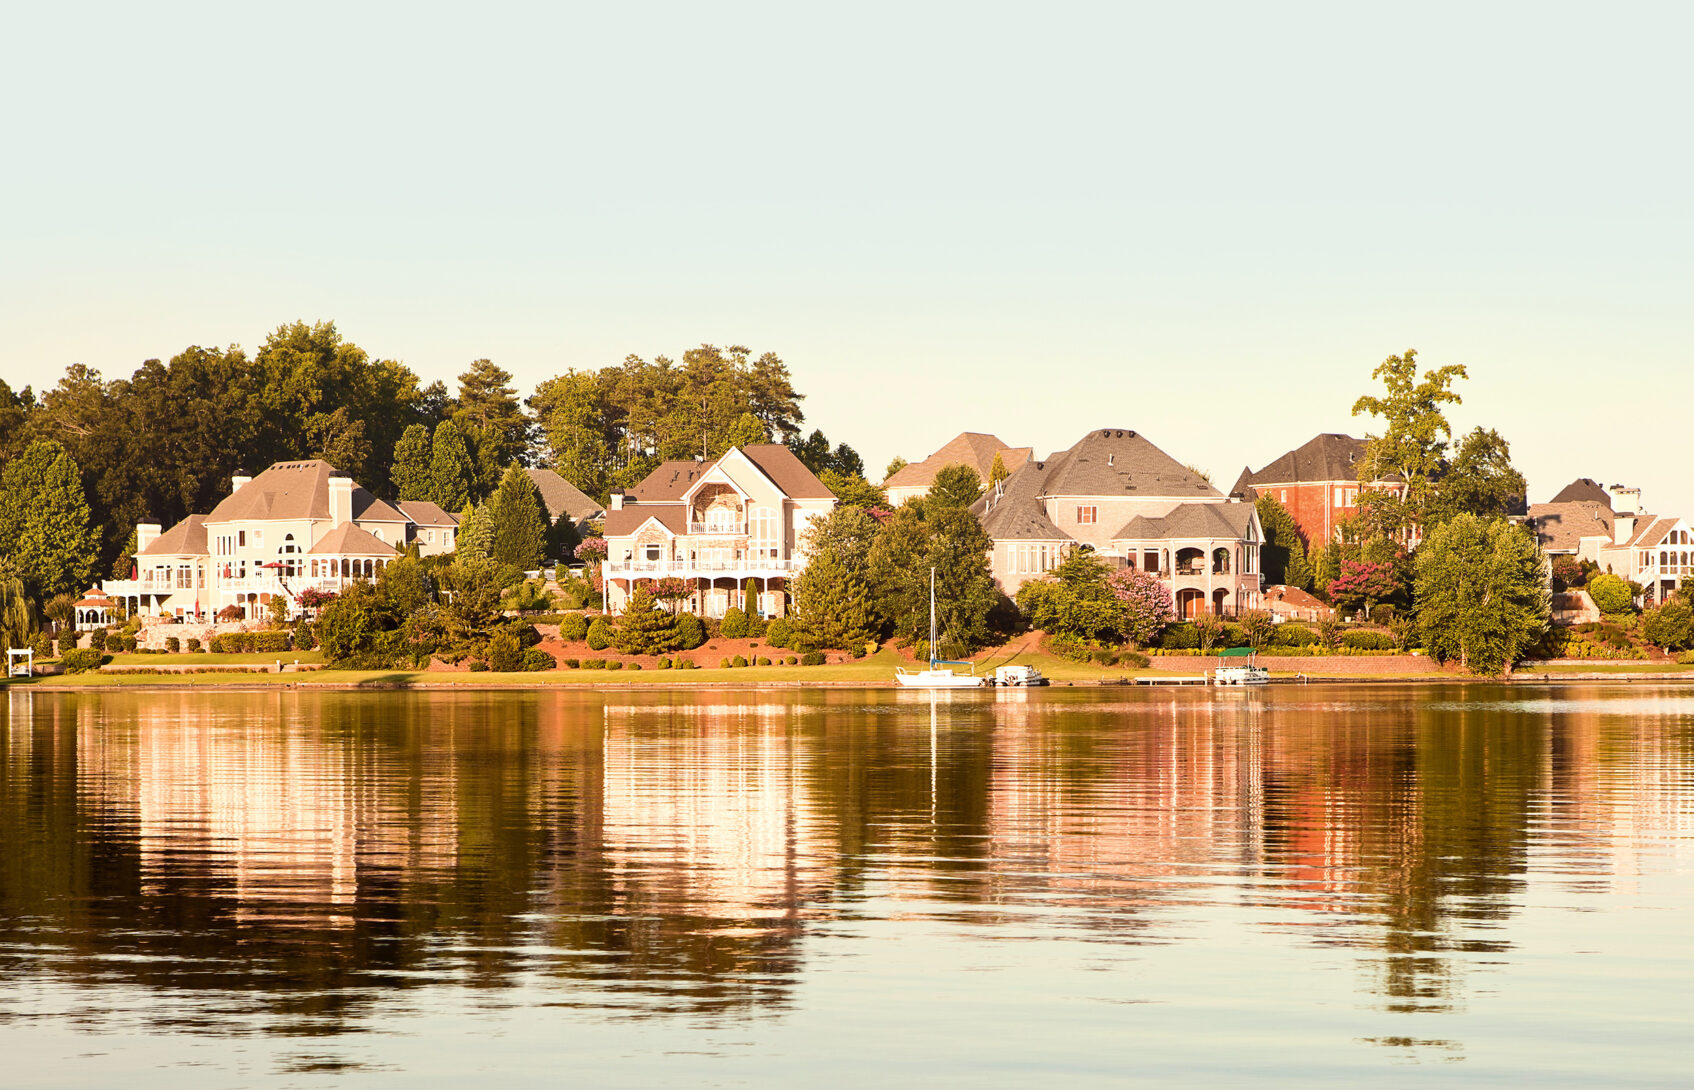 A row of luxury homes reflected in a lake.